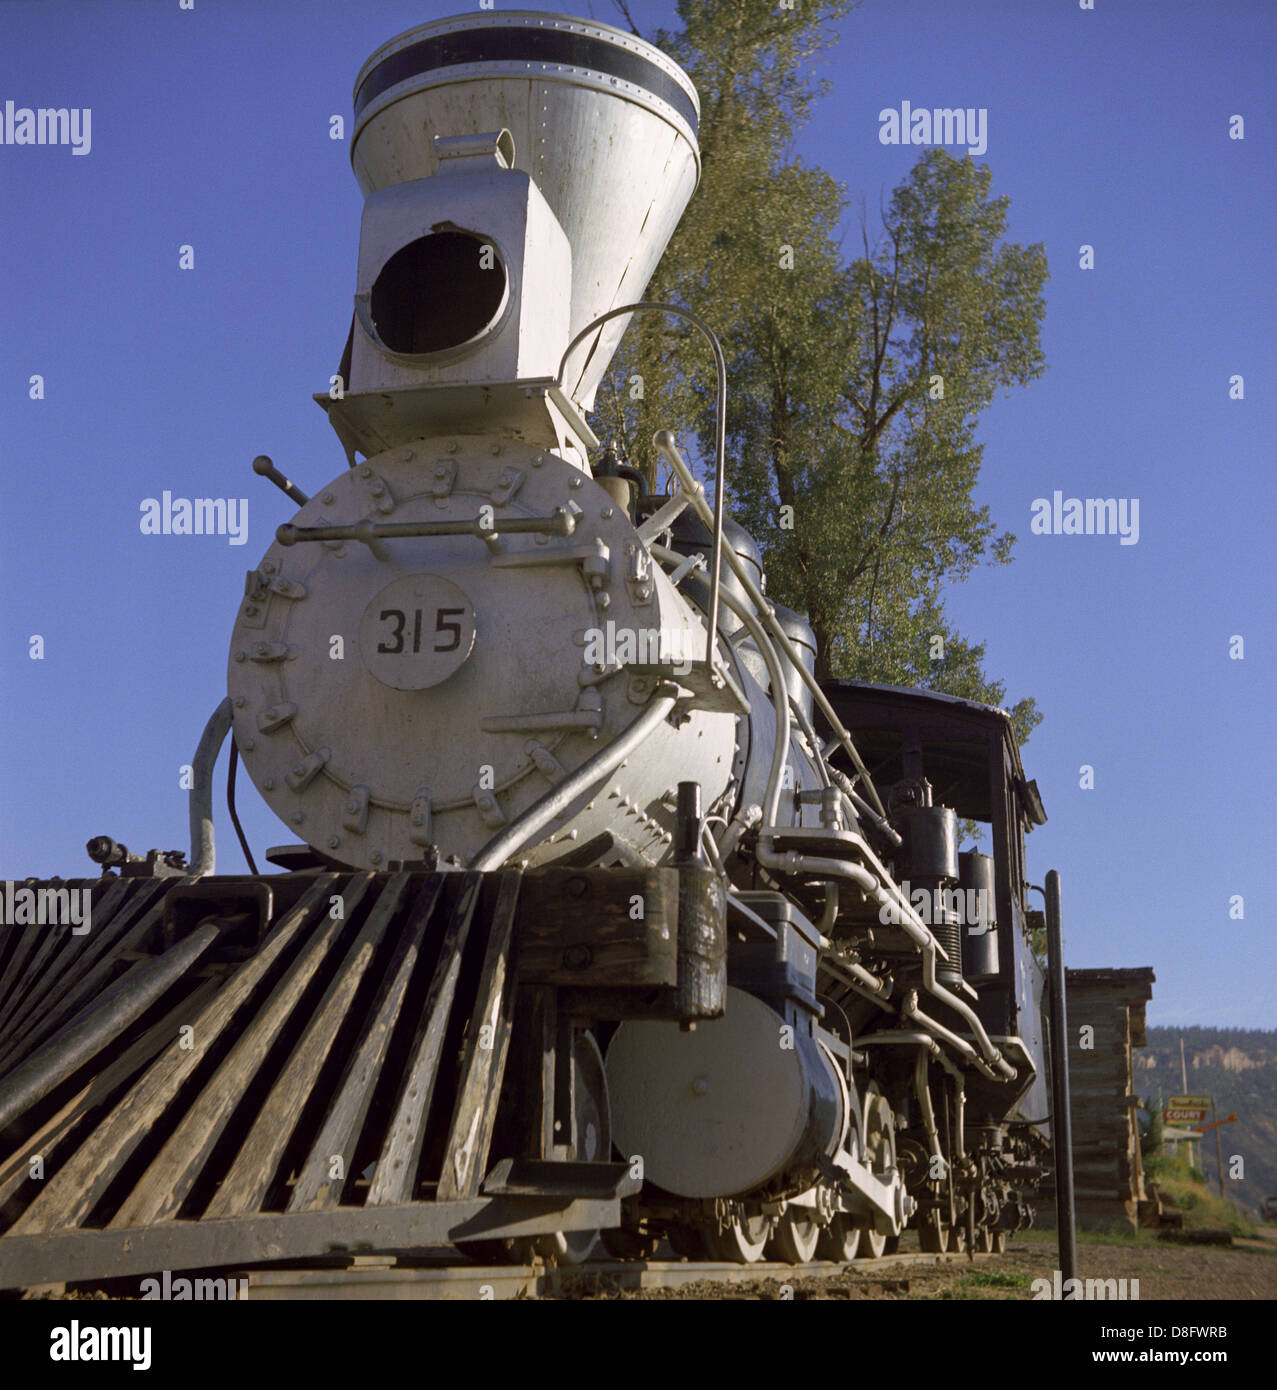 D&RGW Baldwin engine 315, a 2-8-0, Consolidation on display at Durango, CO 6108 66007 Stock Photo